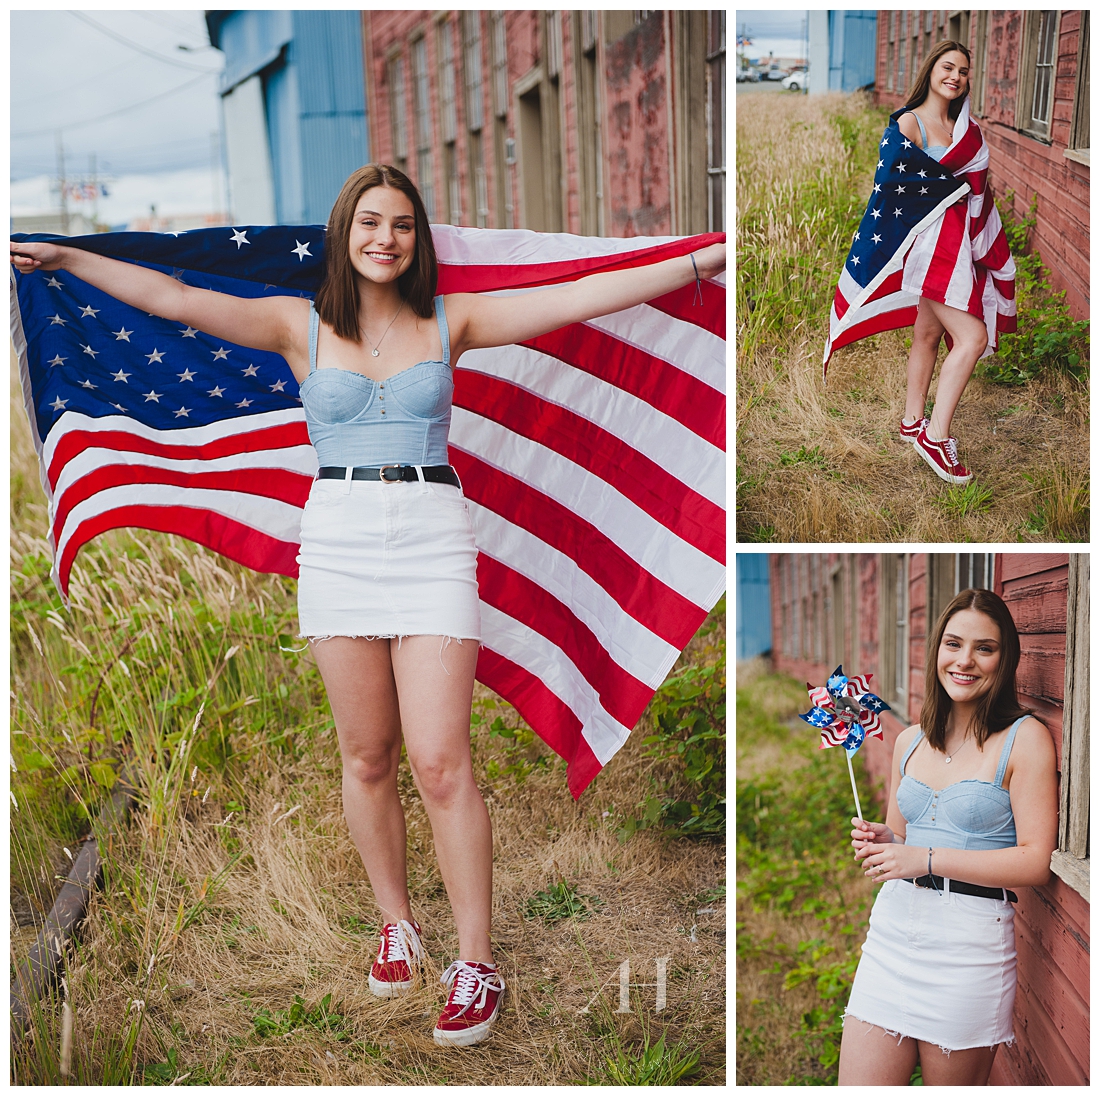 High School Senior in Blue Corset and White Skirt Holding the American Flag | Photographed by Tacoma Senior Photographer Amanda Howse